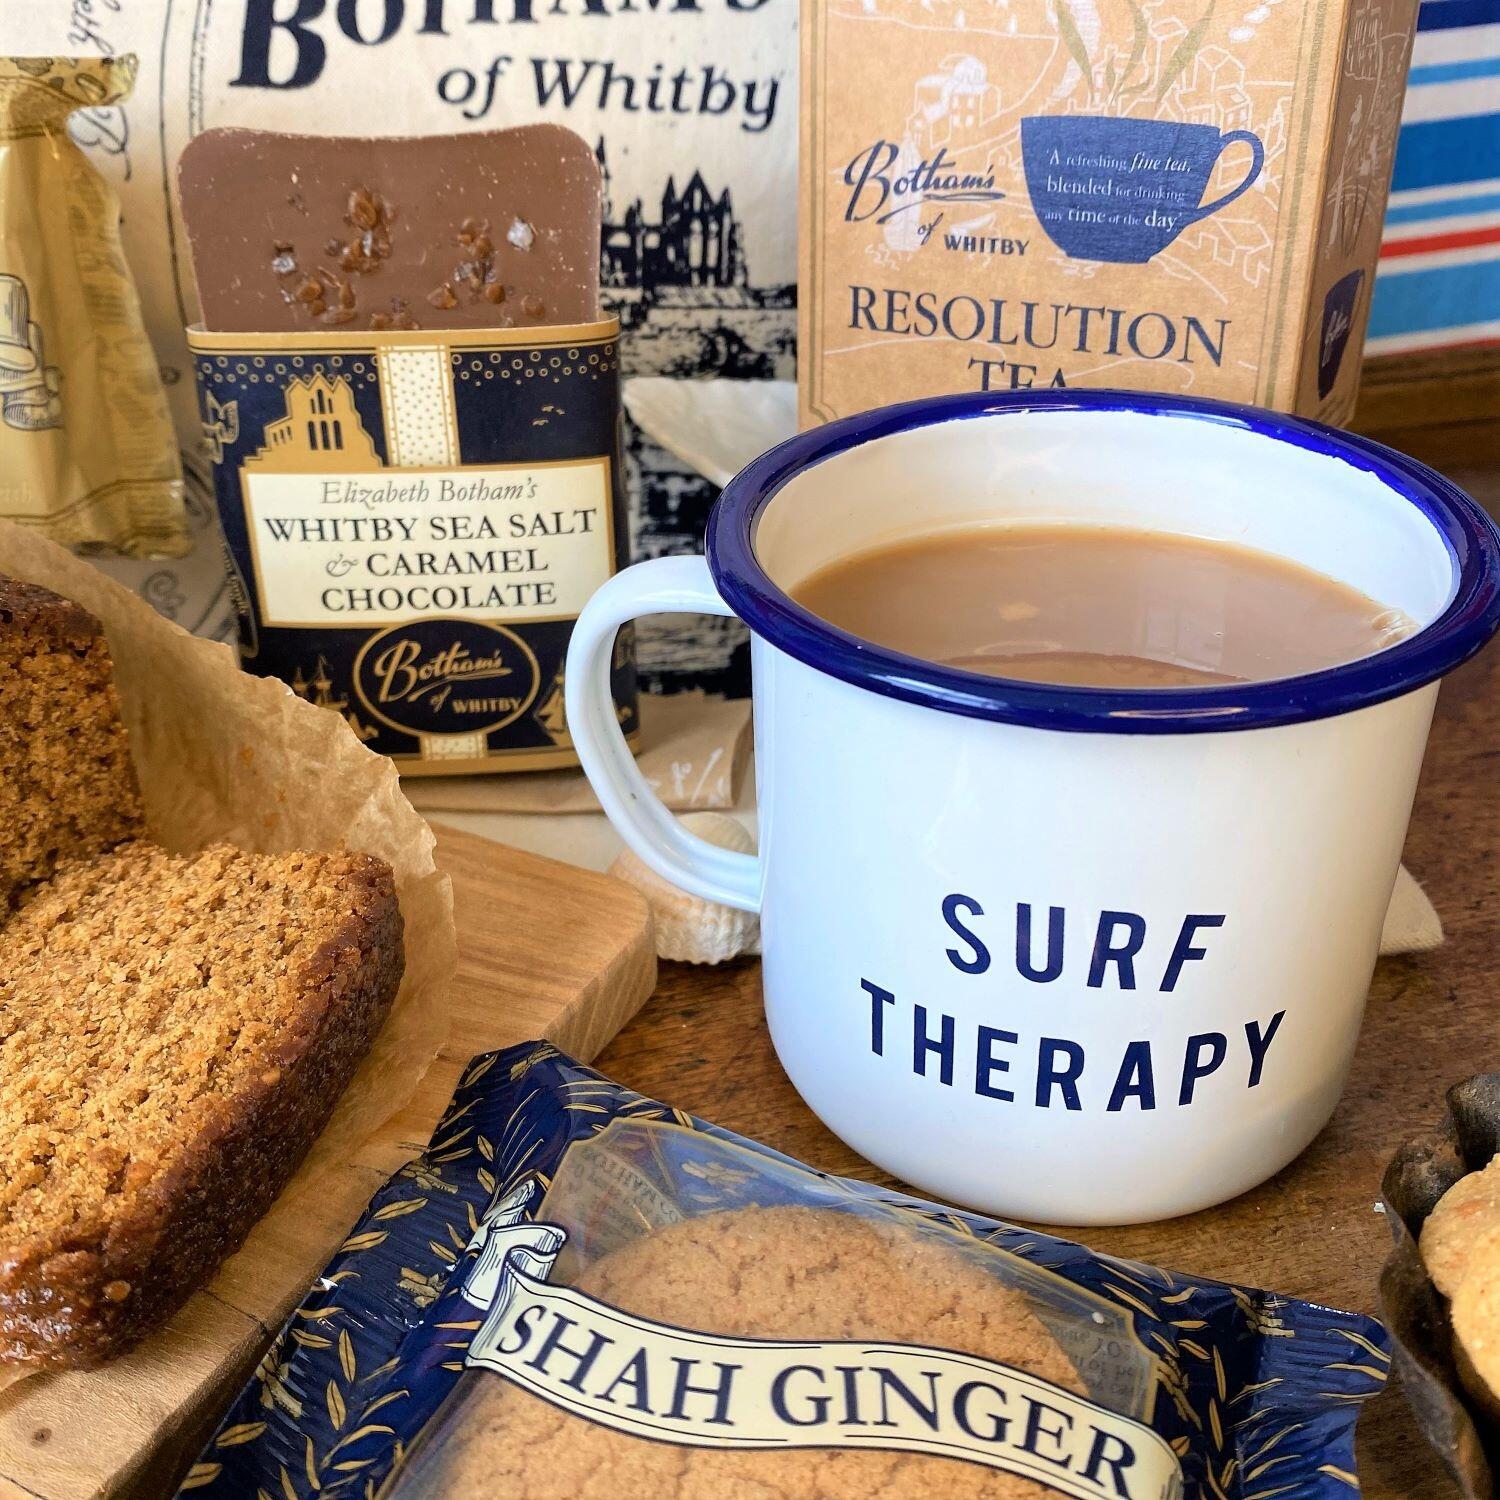 Close-up image of The WAVE Project Mug, which is white enamel with The WAVE Project text on one side and Surf Therapy on the other, all printed in inky navy blue.